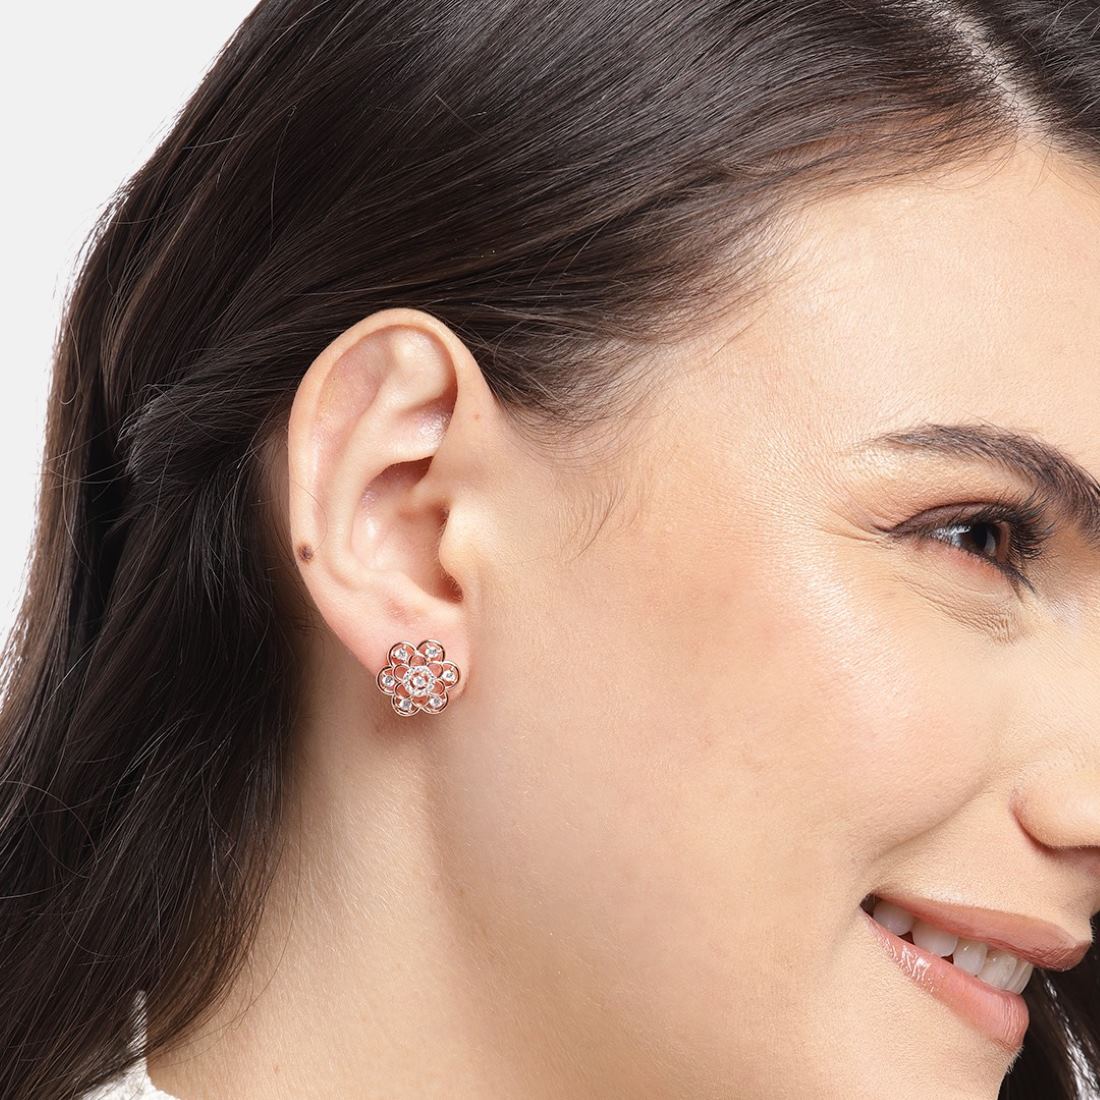 Floral Radiance Rose Gold-Plated Cubic Zirconia 925 Sterling Silver Earrings